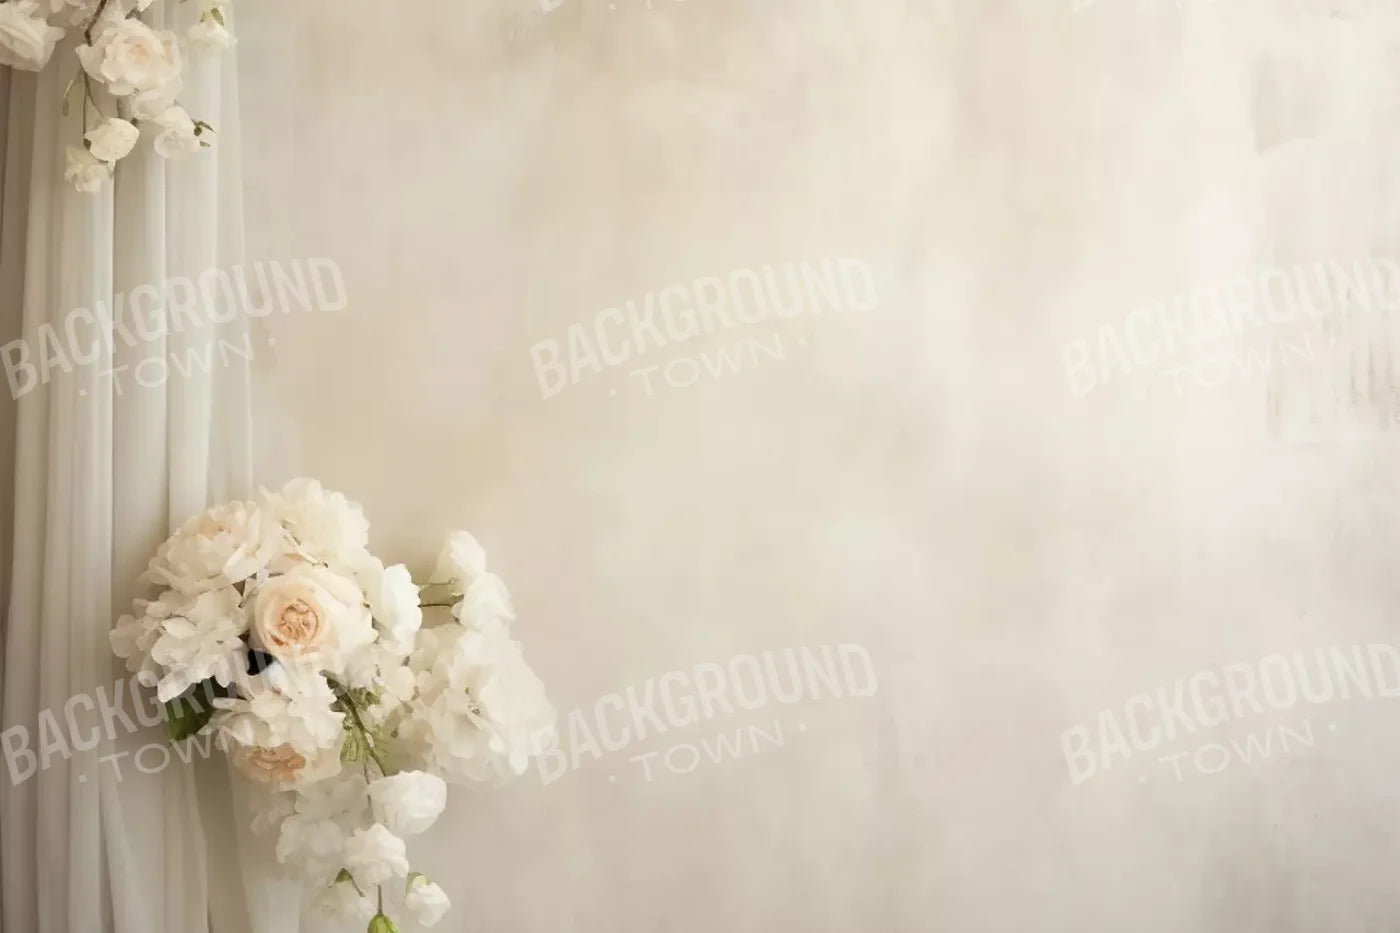 Plaster Wall With Florals 12’X8’ Ultracloth (144 X 96 Inch) Backdrop